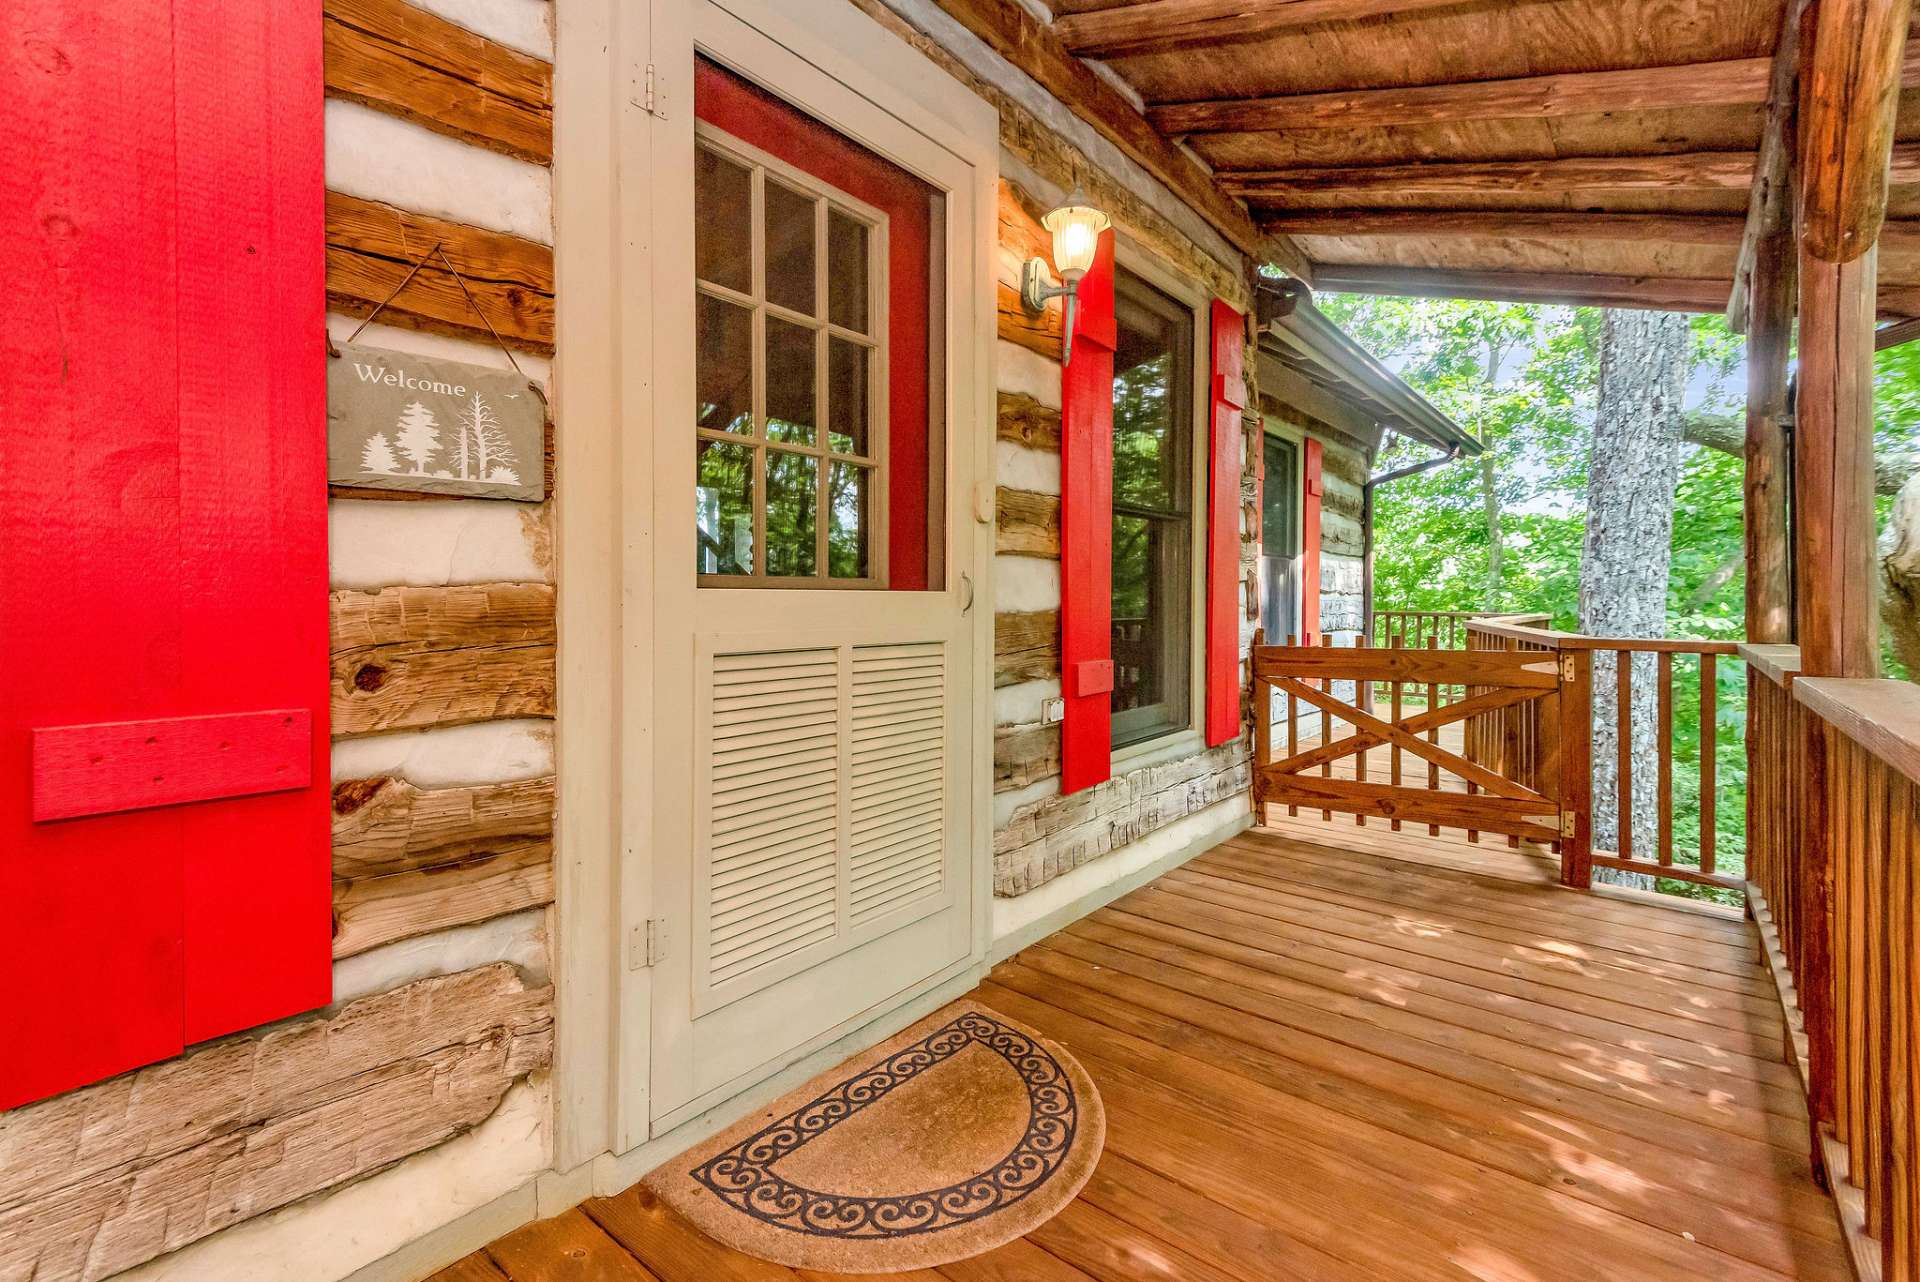 The entry includes a wrap around covered porch.